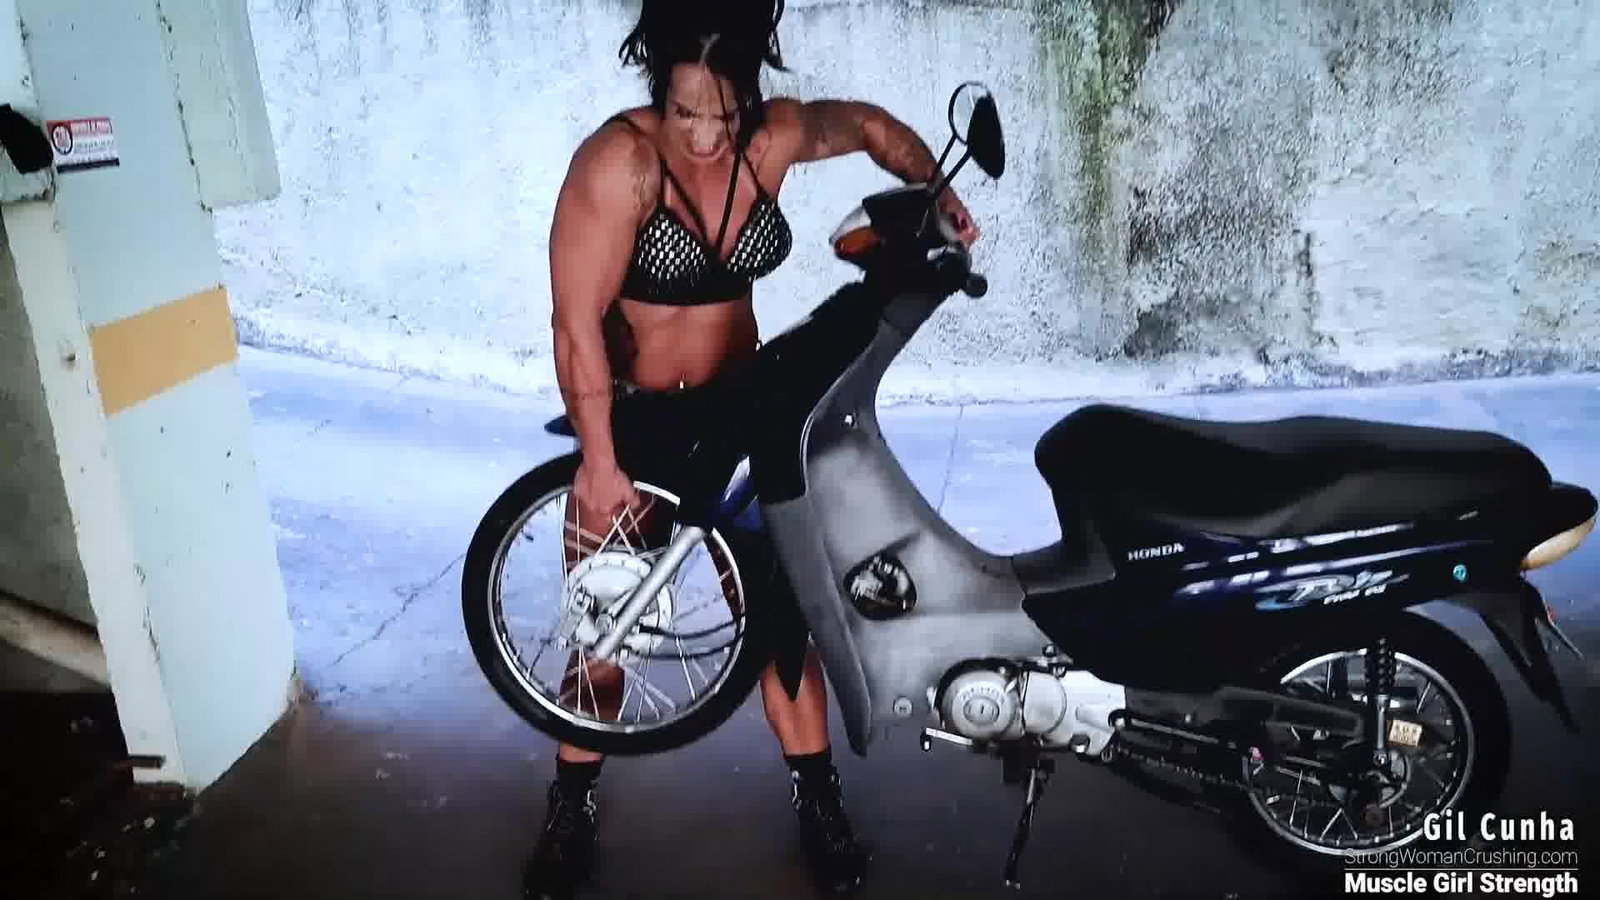 Photo by MusclegirlStrength with the username @MusclegirlStrength, who is a brand user,  January 19, 2024 at 12:12 PM and the text says 'Muscle Goddess Gil Cunha Lifts Scooter with Insane Strength!
Full Video: https://bit.ly/30iVkyz

Discover the power and sensuality of muscular female bodybuilders as they flex, lift cars, bend metal, and crush things - explore Gil Cunha's impressive..'